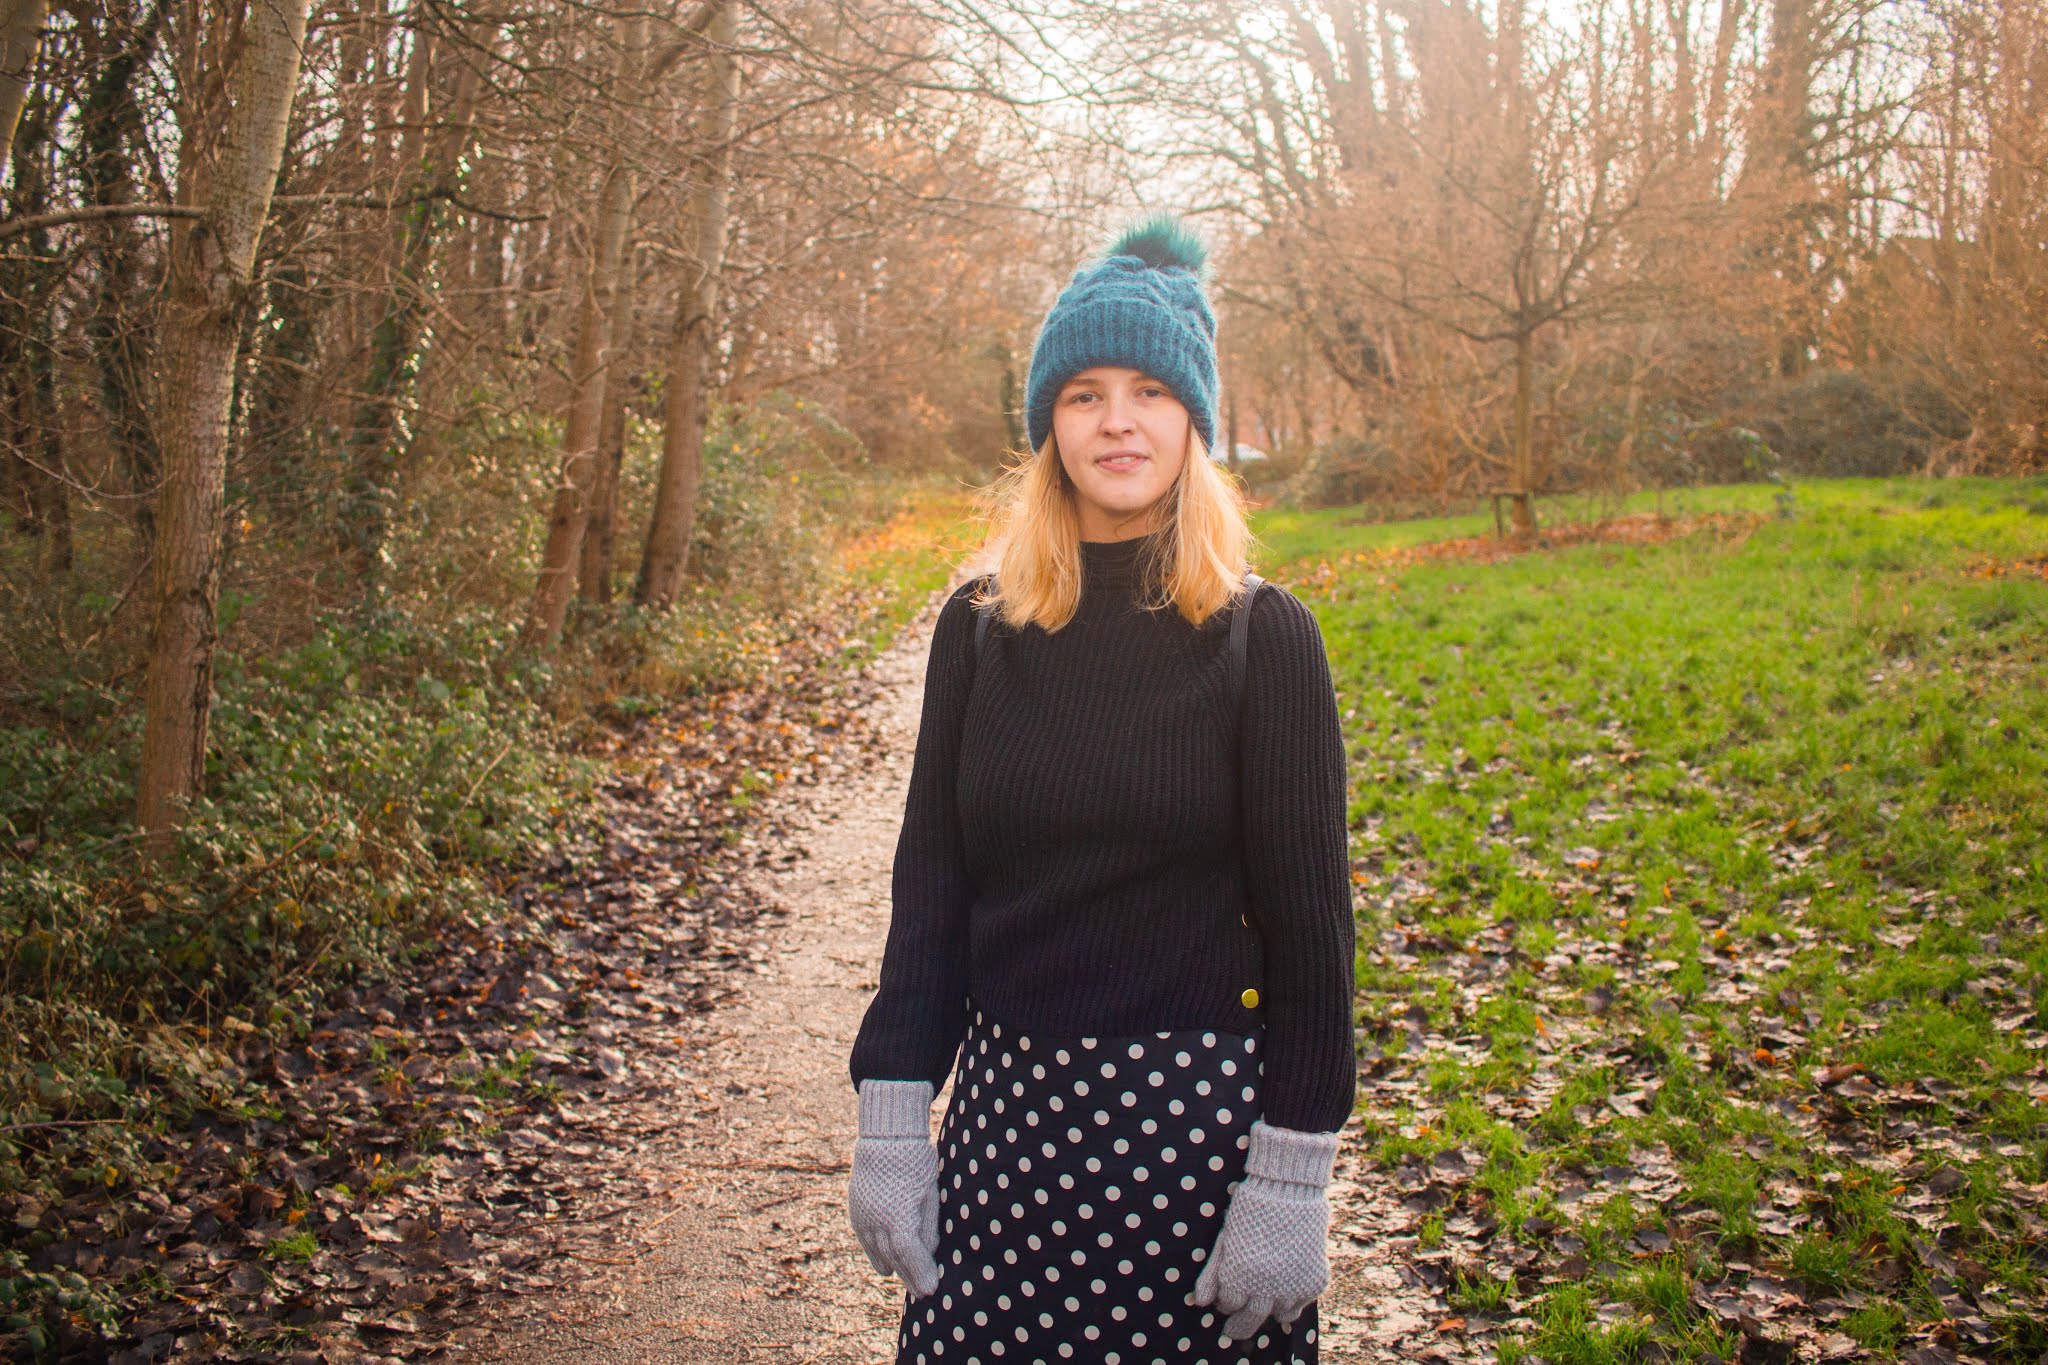 fashion blogger chloeharriets wearing polka dress, jumper and hat, walking through nature, smiling, how to relieve stress blog self-care intentional living